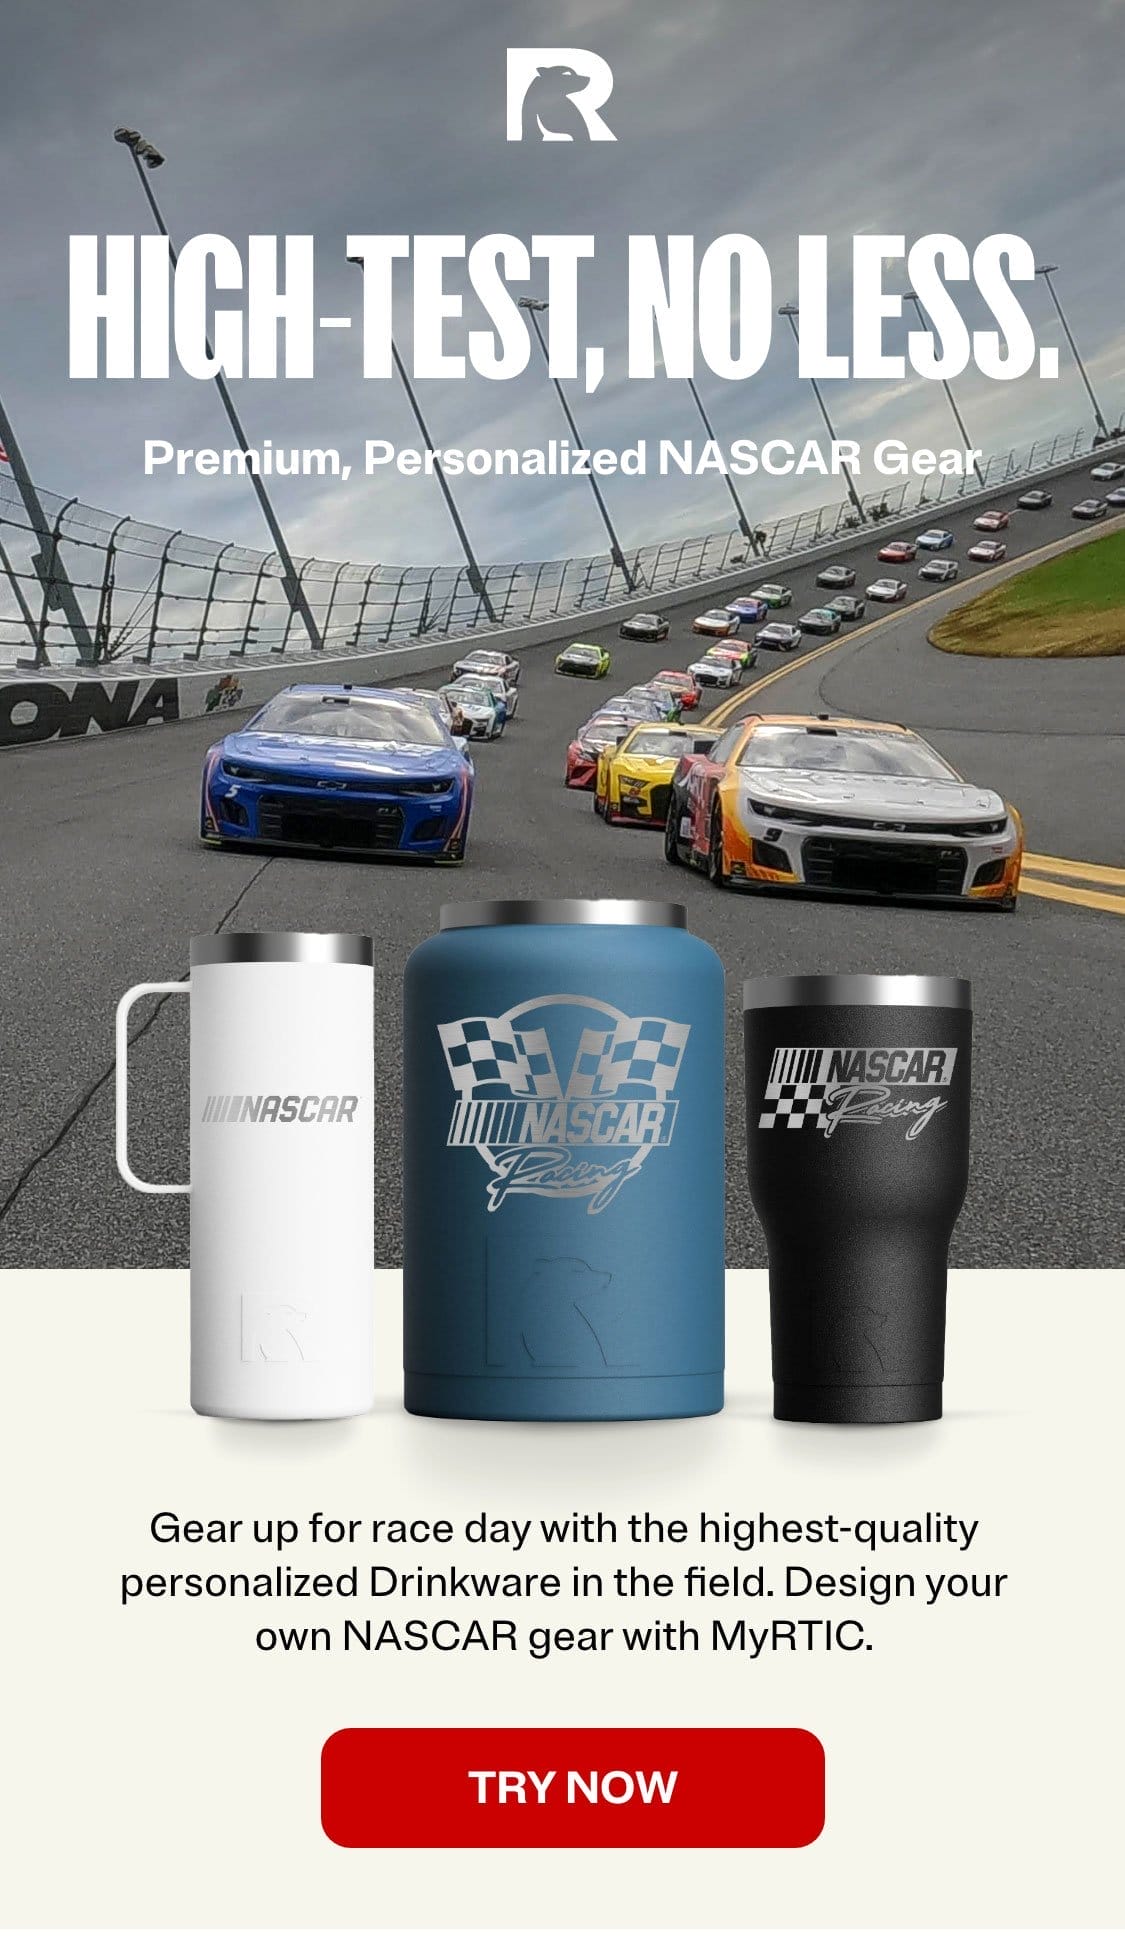 High Test, No Less. Gear up for race day with personalize drinkware.